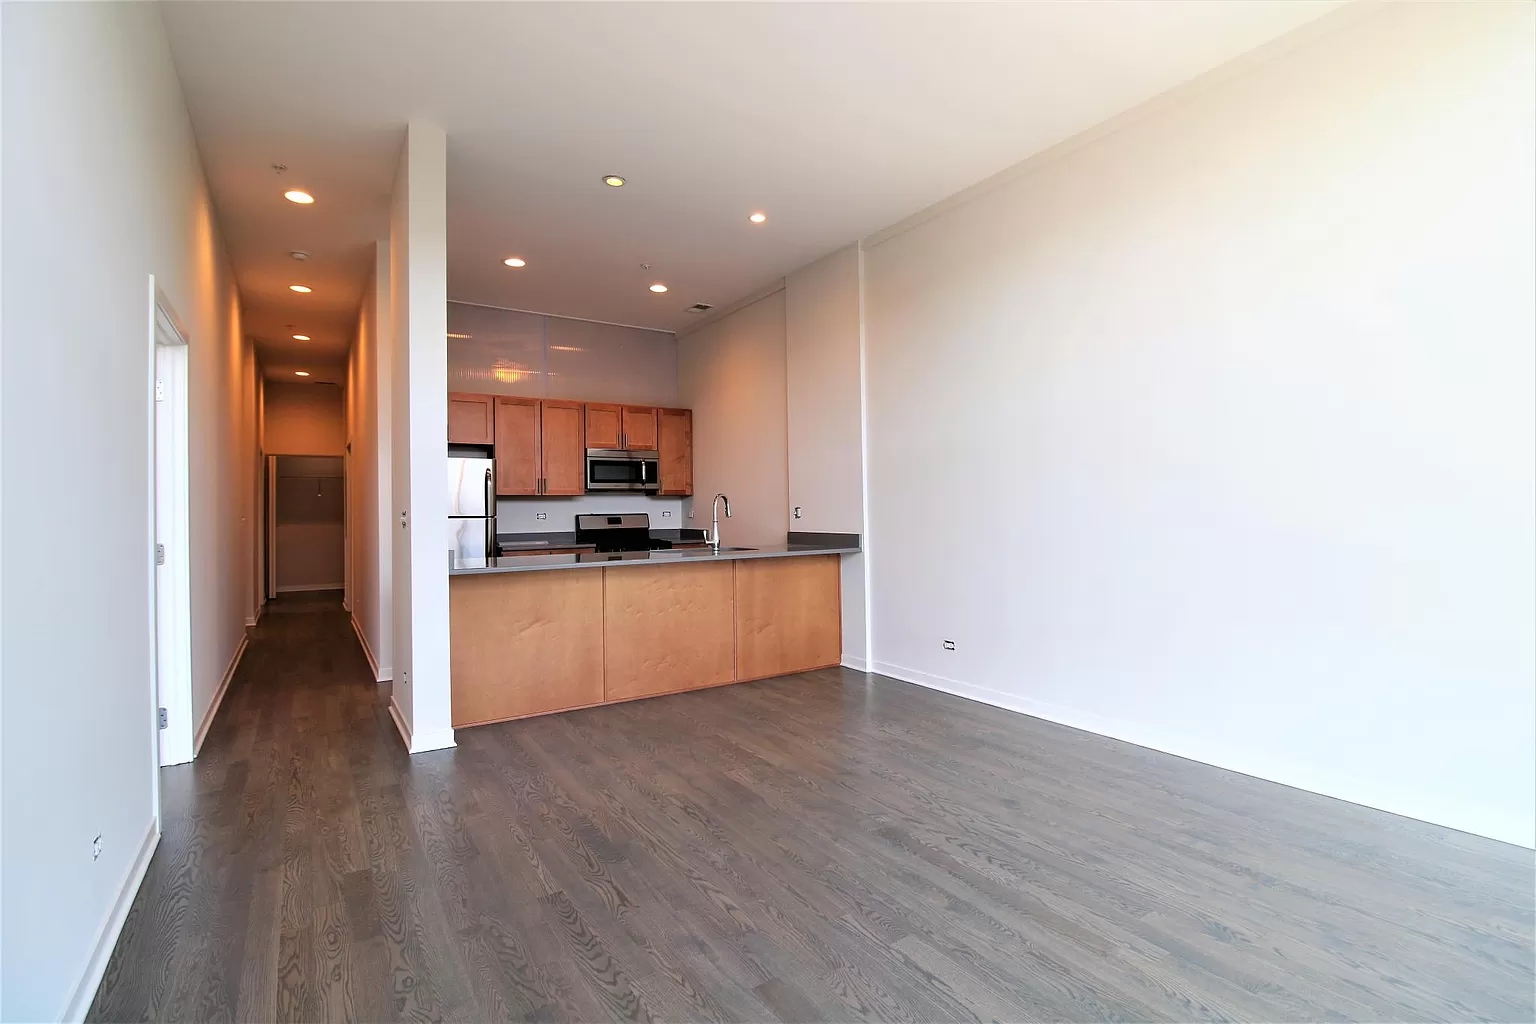 Loyola Housing 2.5 Bed 2 bath apartment - Available for lease takeover or looking for a room mate for Loyola University Chicago Students in Chicago, IL